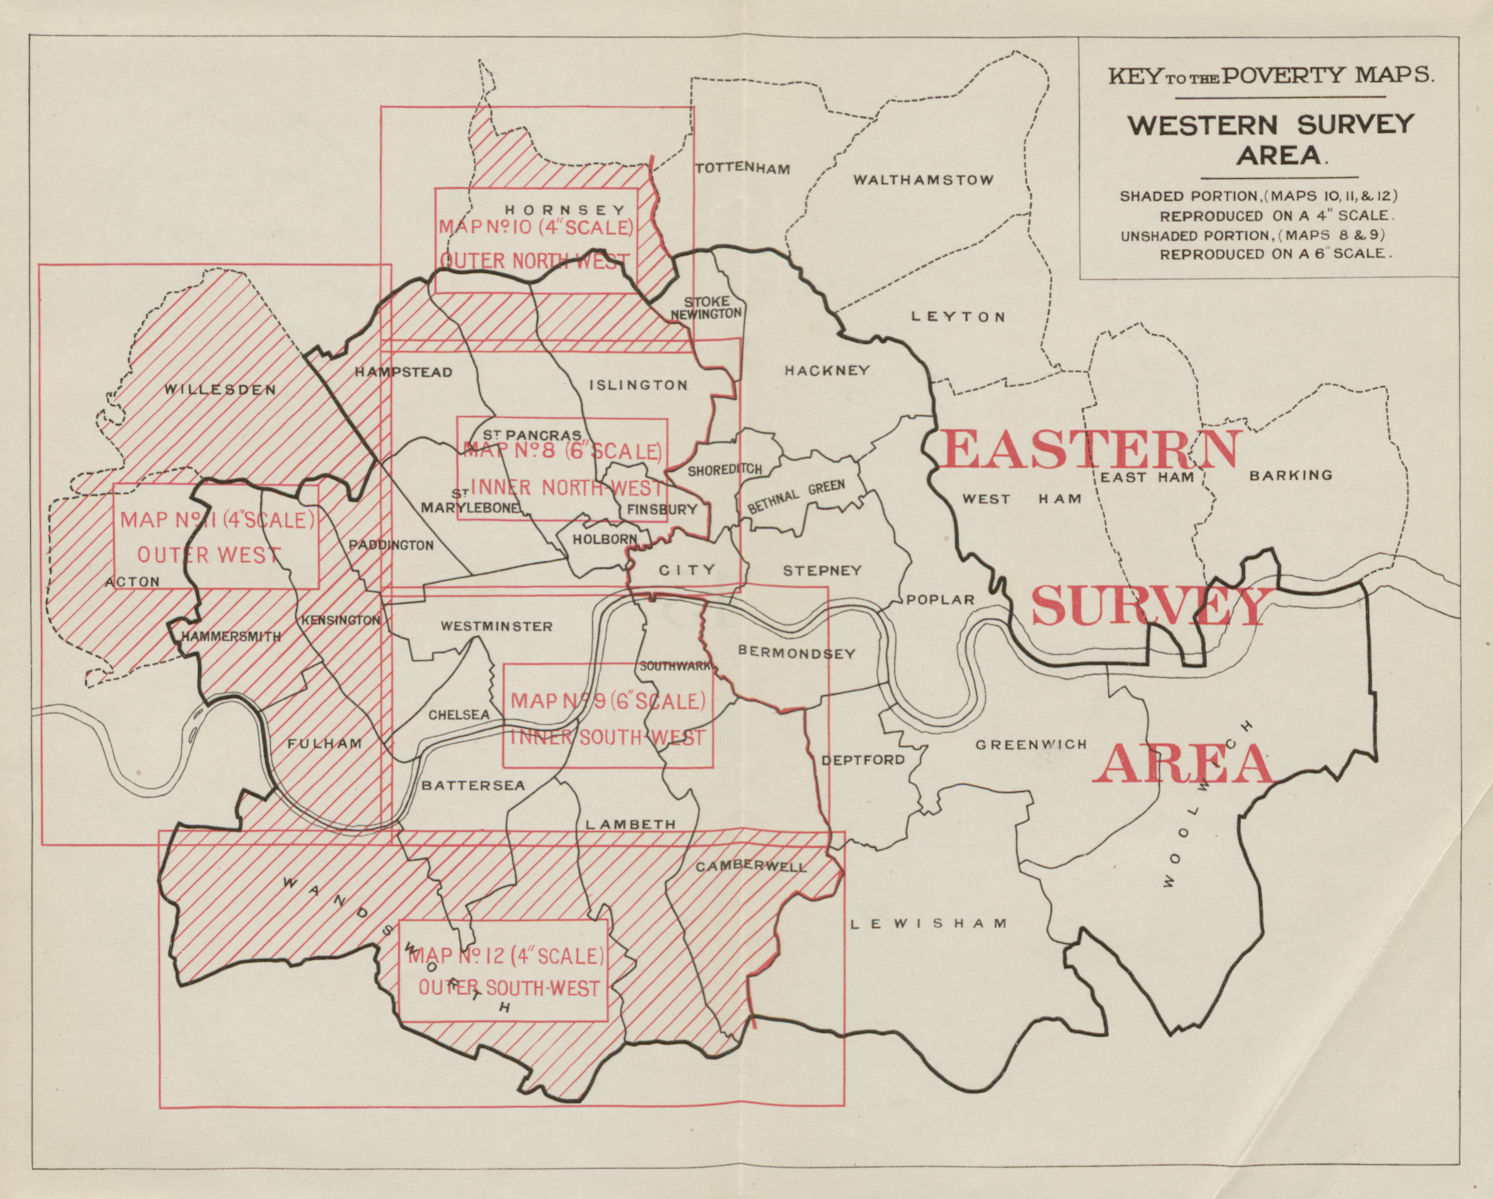 Key to Poverty Maps. Western Survey Area. London. Charles Booth / LSE 1930